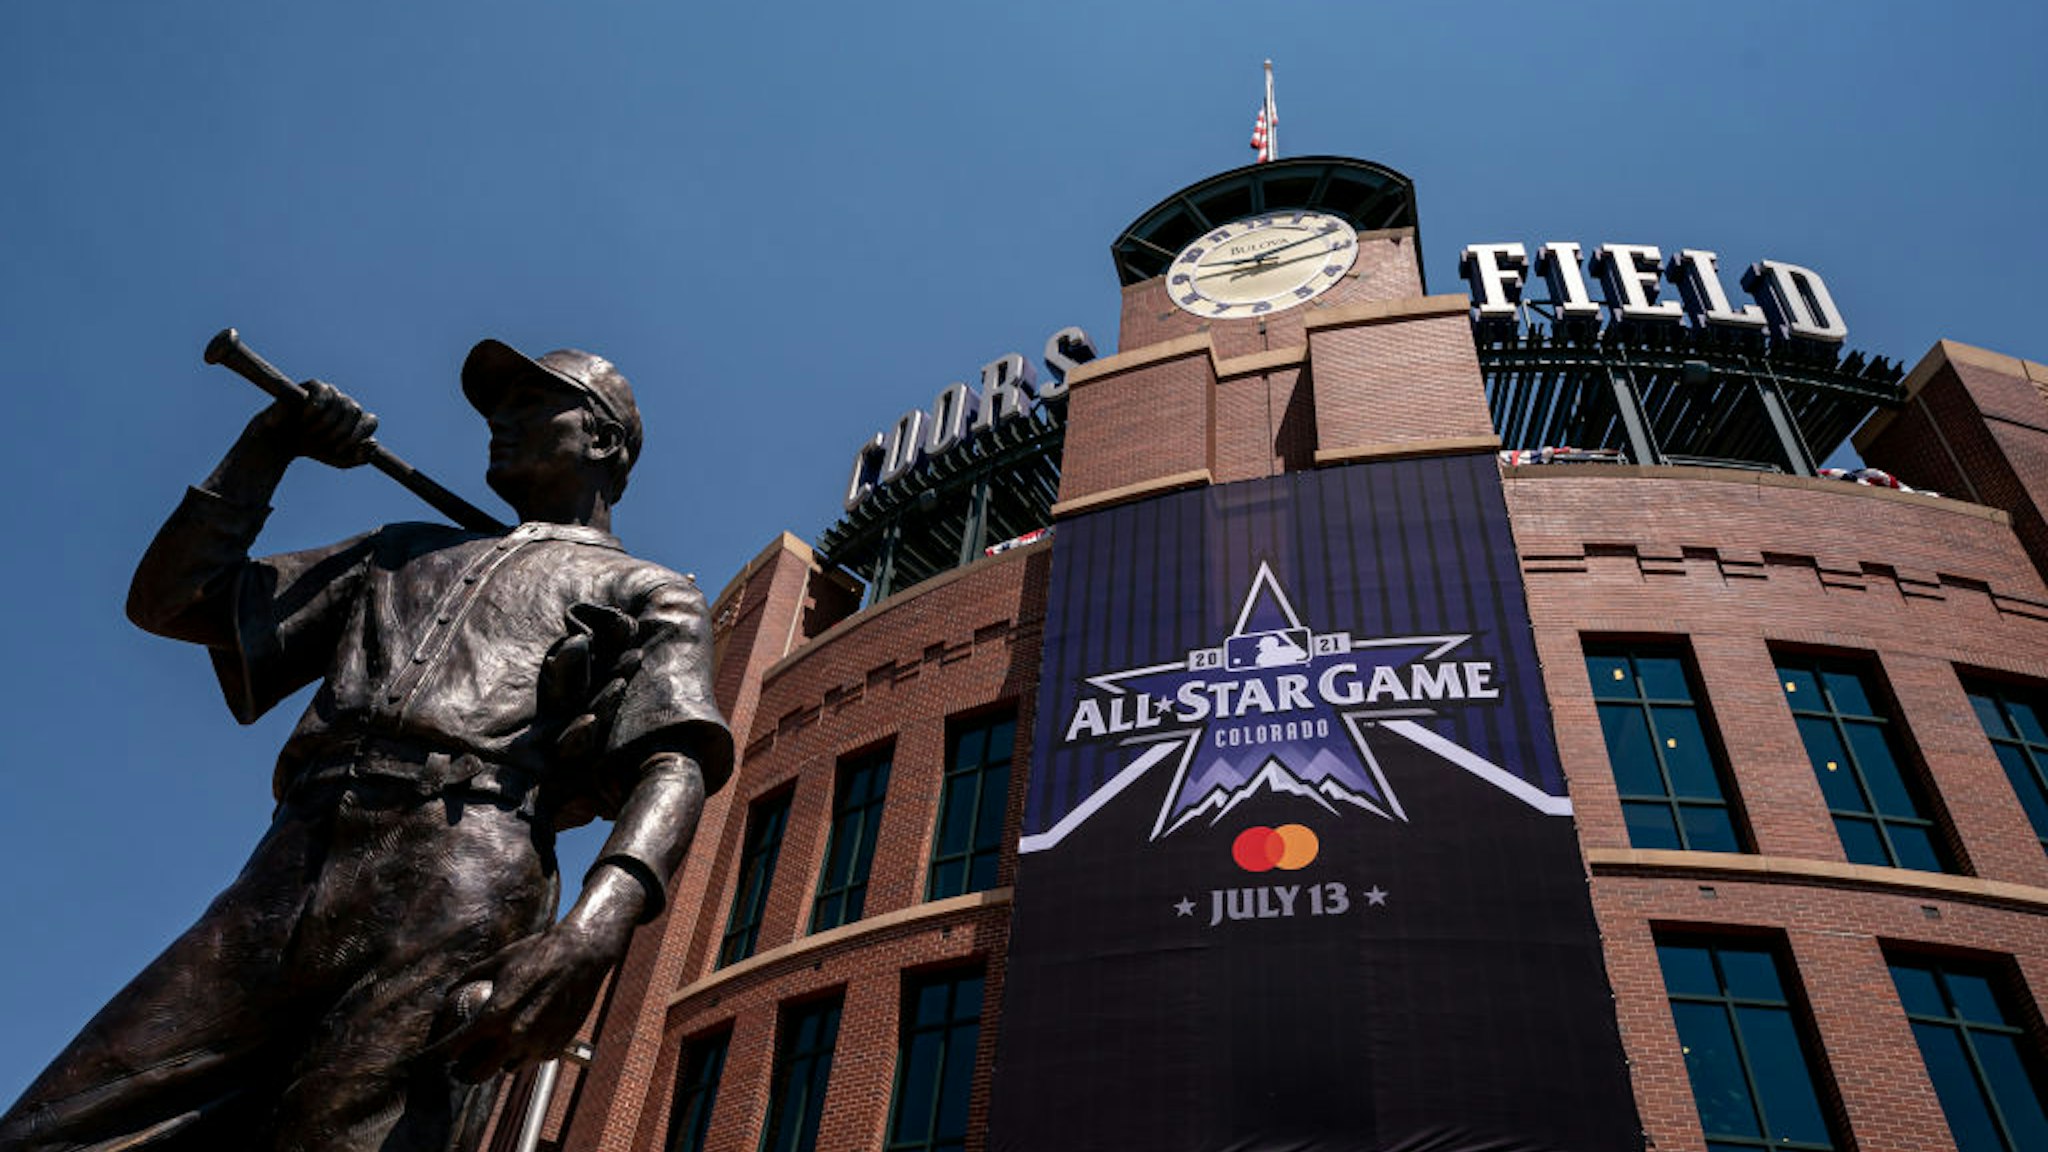 DENVER, CO - JULY 07: The MLB All-Star Logo adorns the facade at Coors Field on July 7, 2021 in Denver, Colorado. (Photo by Matt Dirksen/Colorado Rockies/Getty Images)